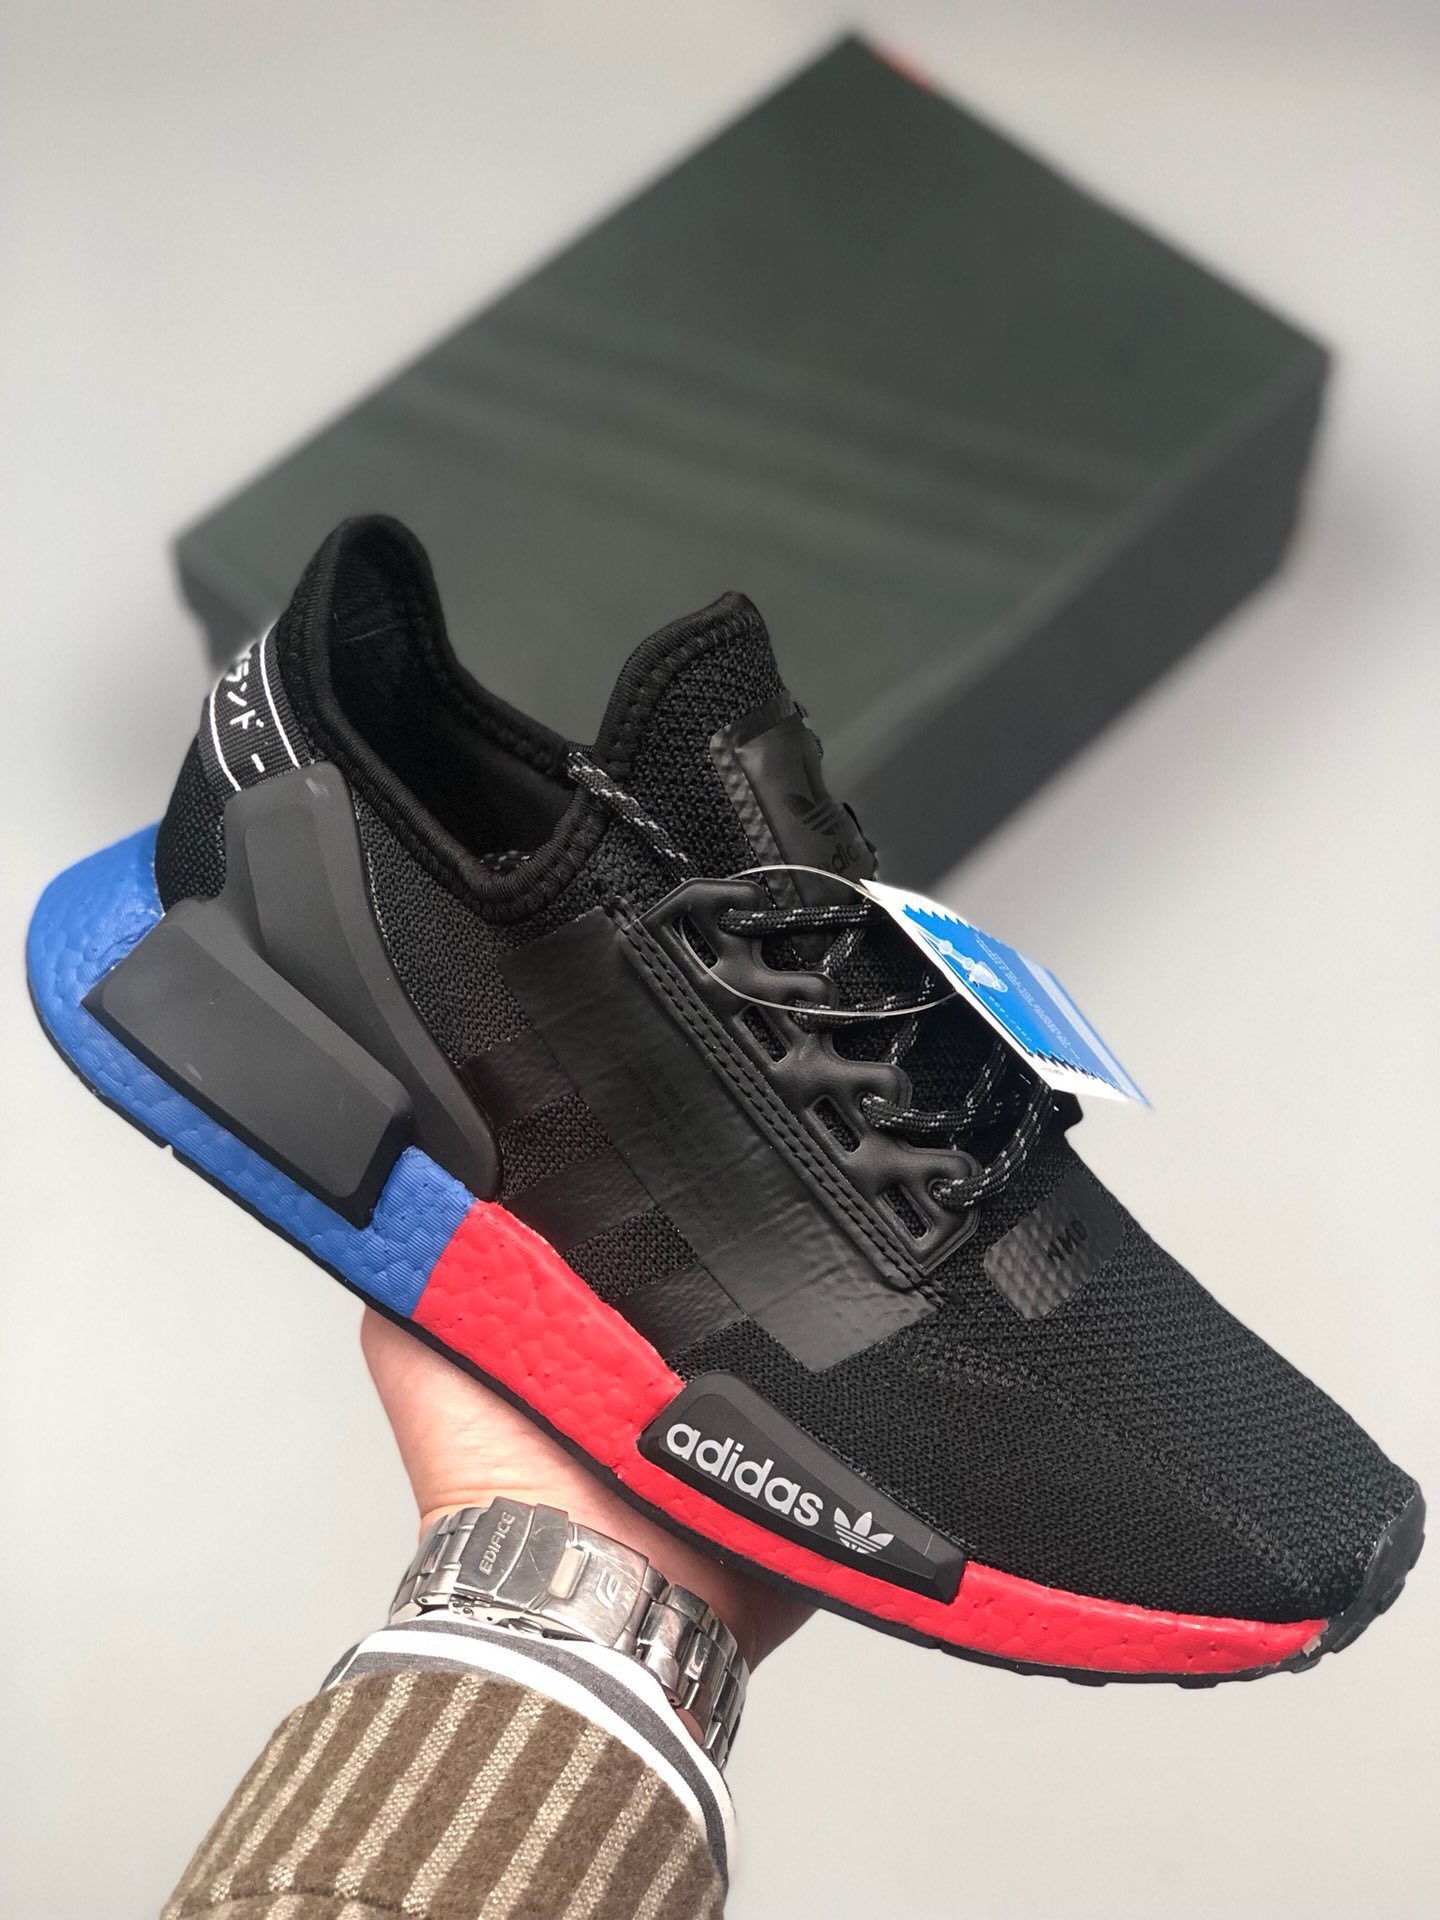 nmd black for sale